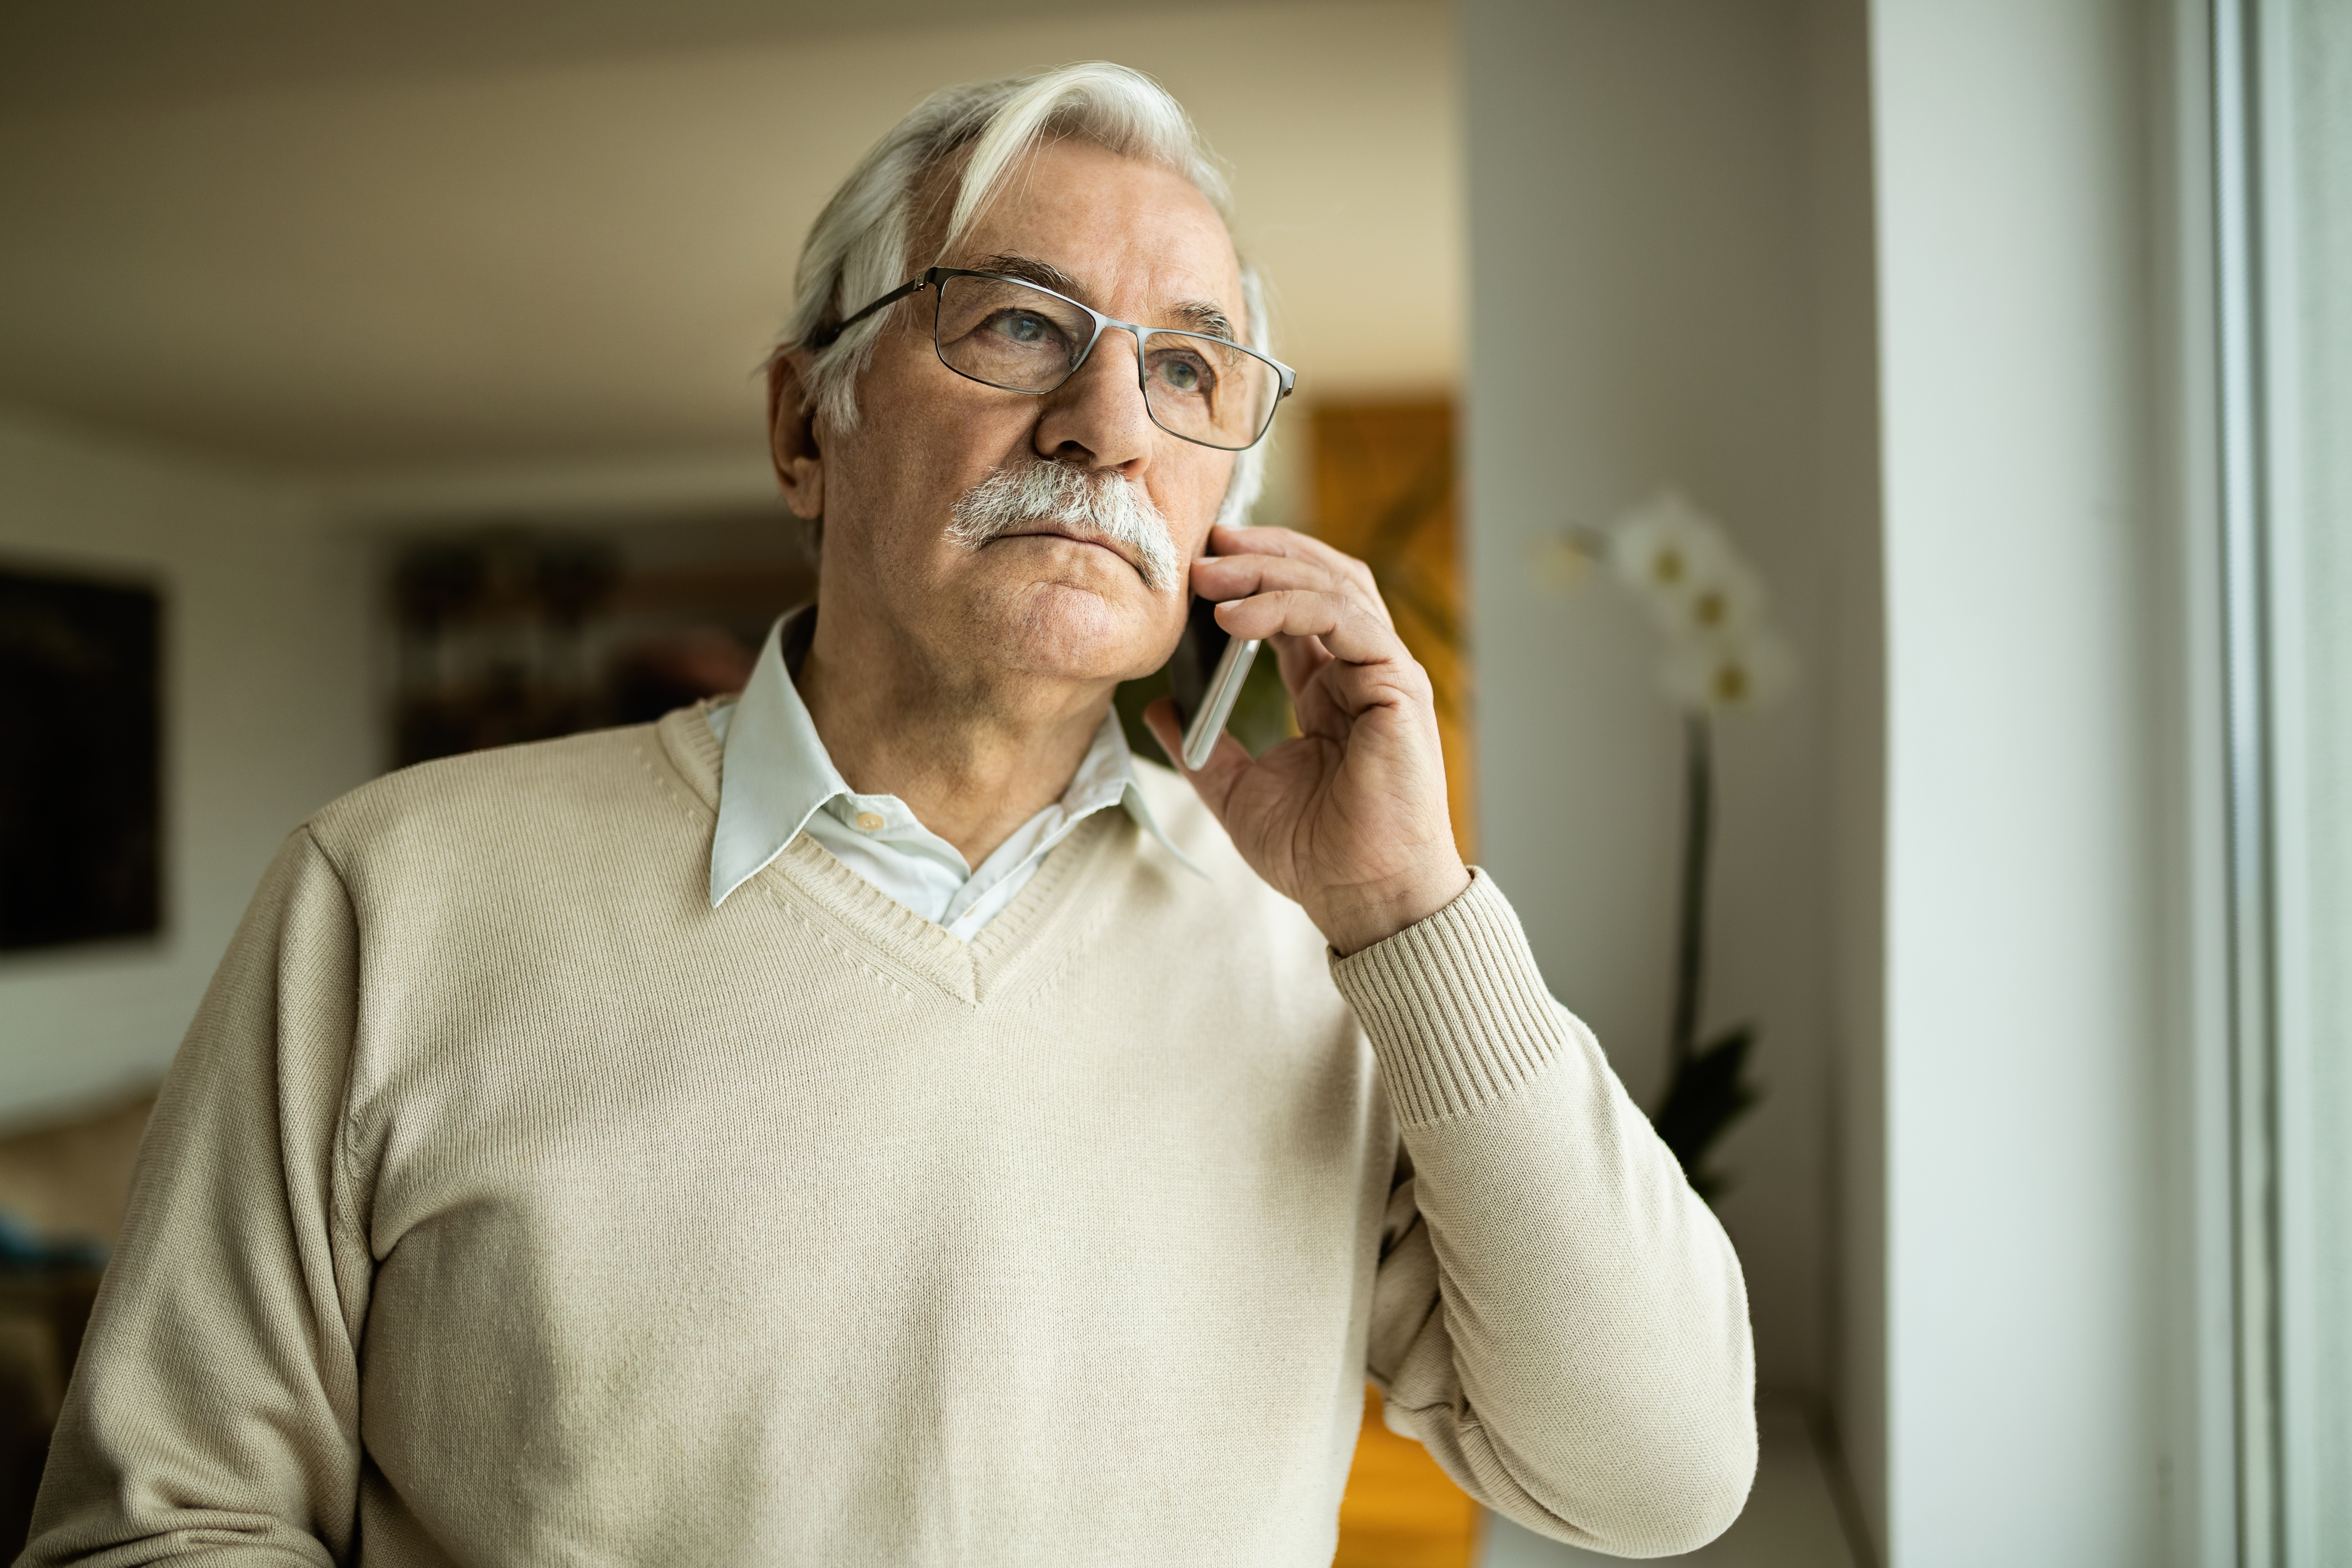 A senior man talking on the phone | Source: Shutterstock